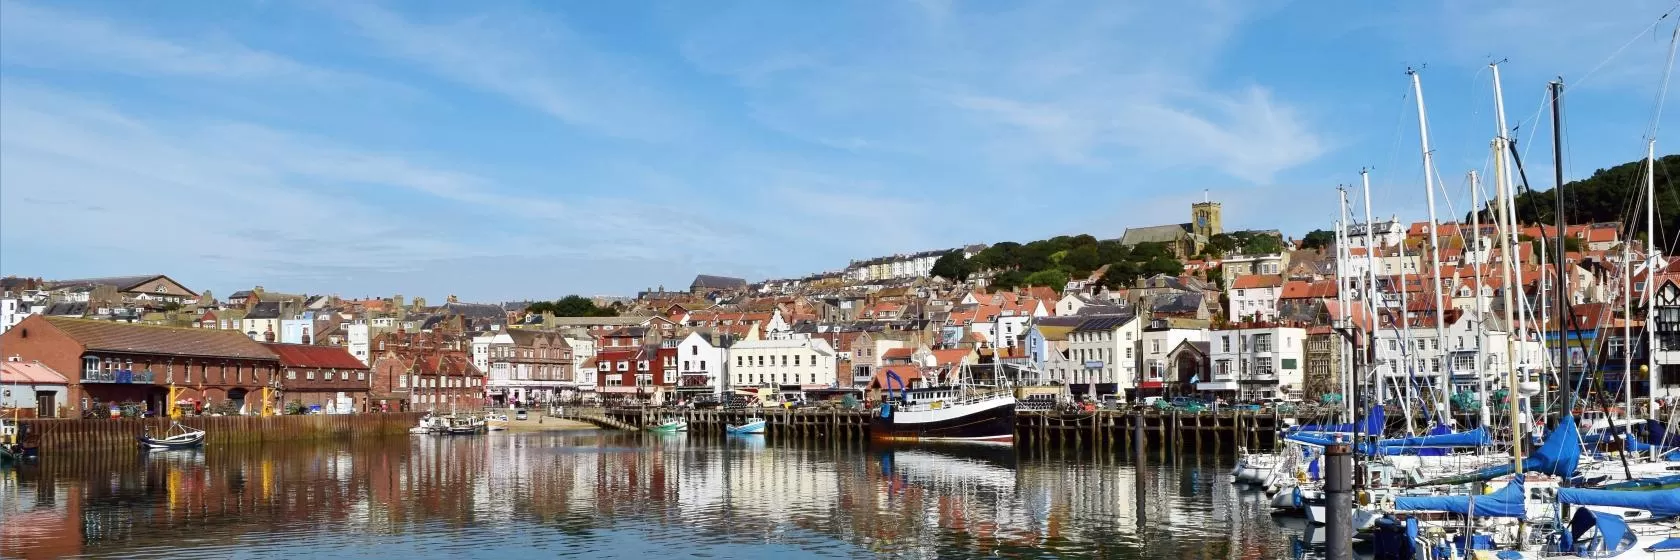 Scarborough, North Yorkshire Hotels